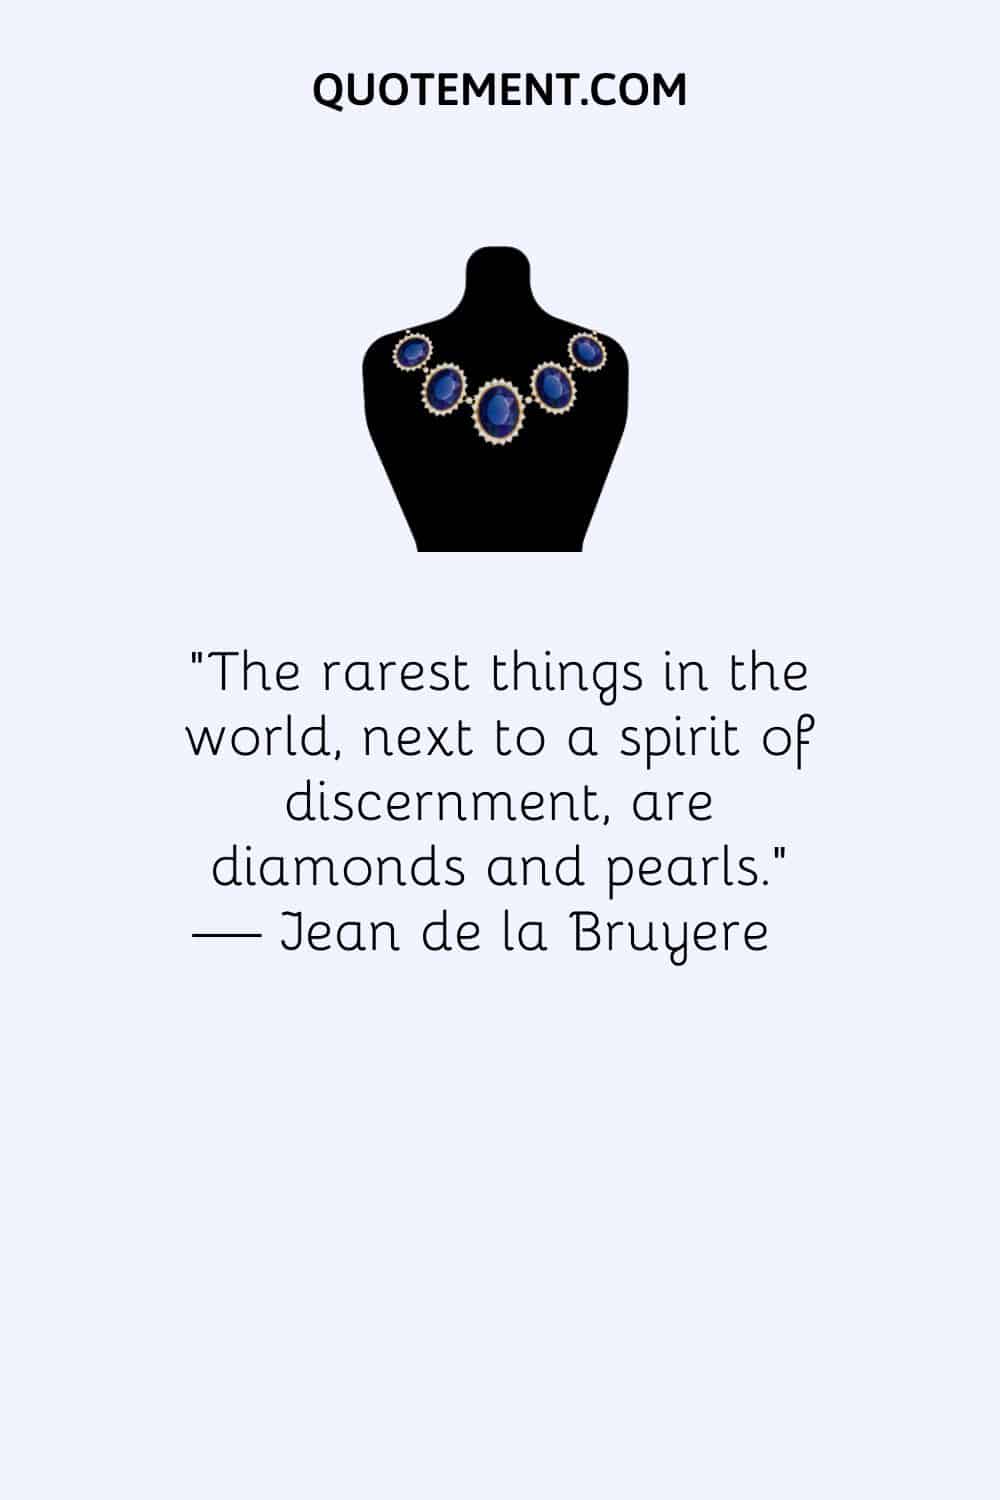 The rarest things in the world, next to a spirit of discernment, are diamonds and pearls